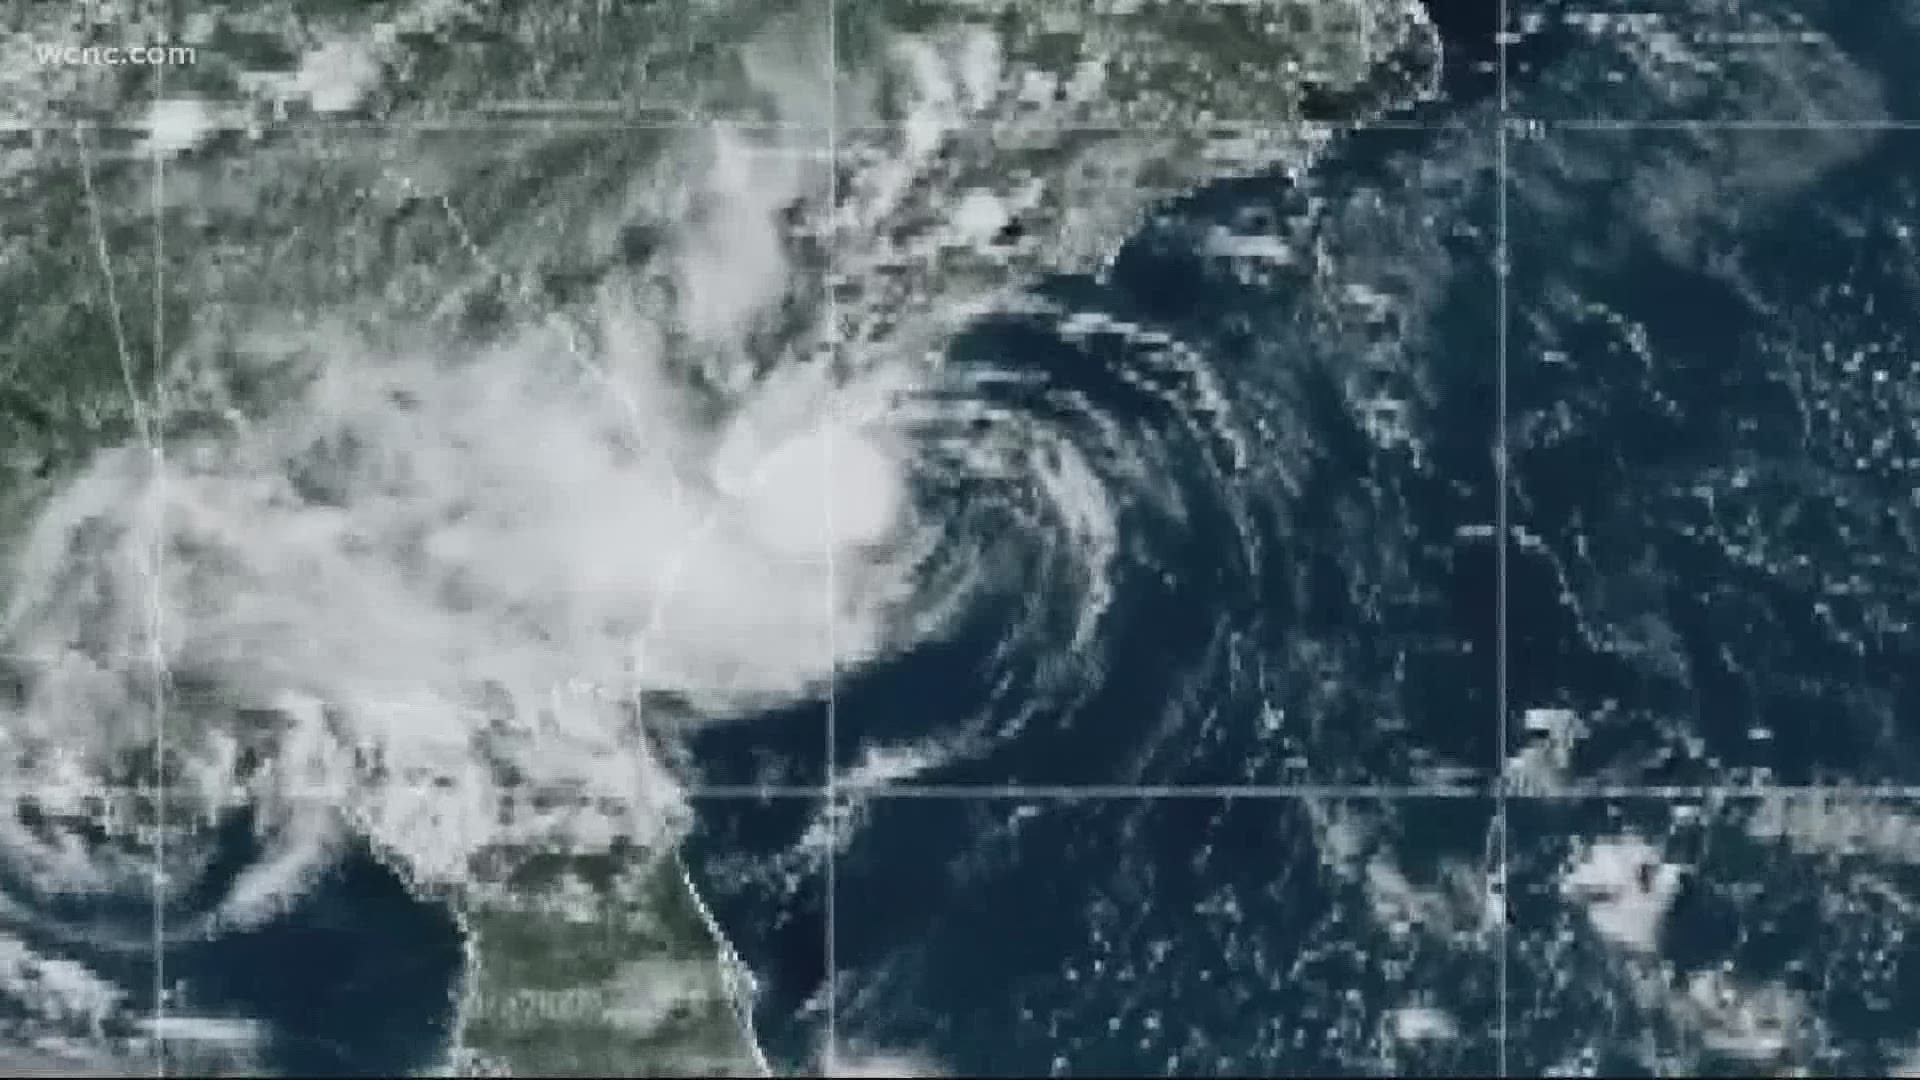 Chris Mulcahy compares last year's historic hurricane season with this year's start.